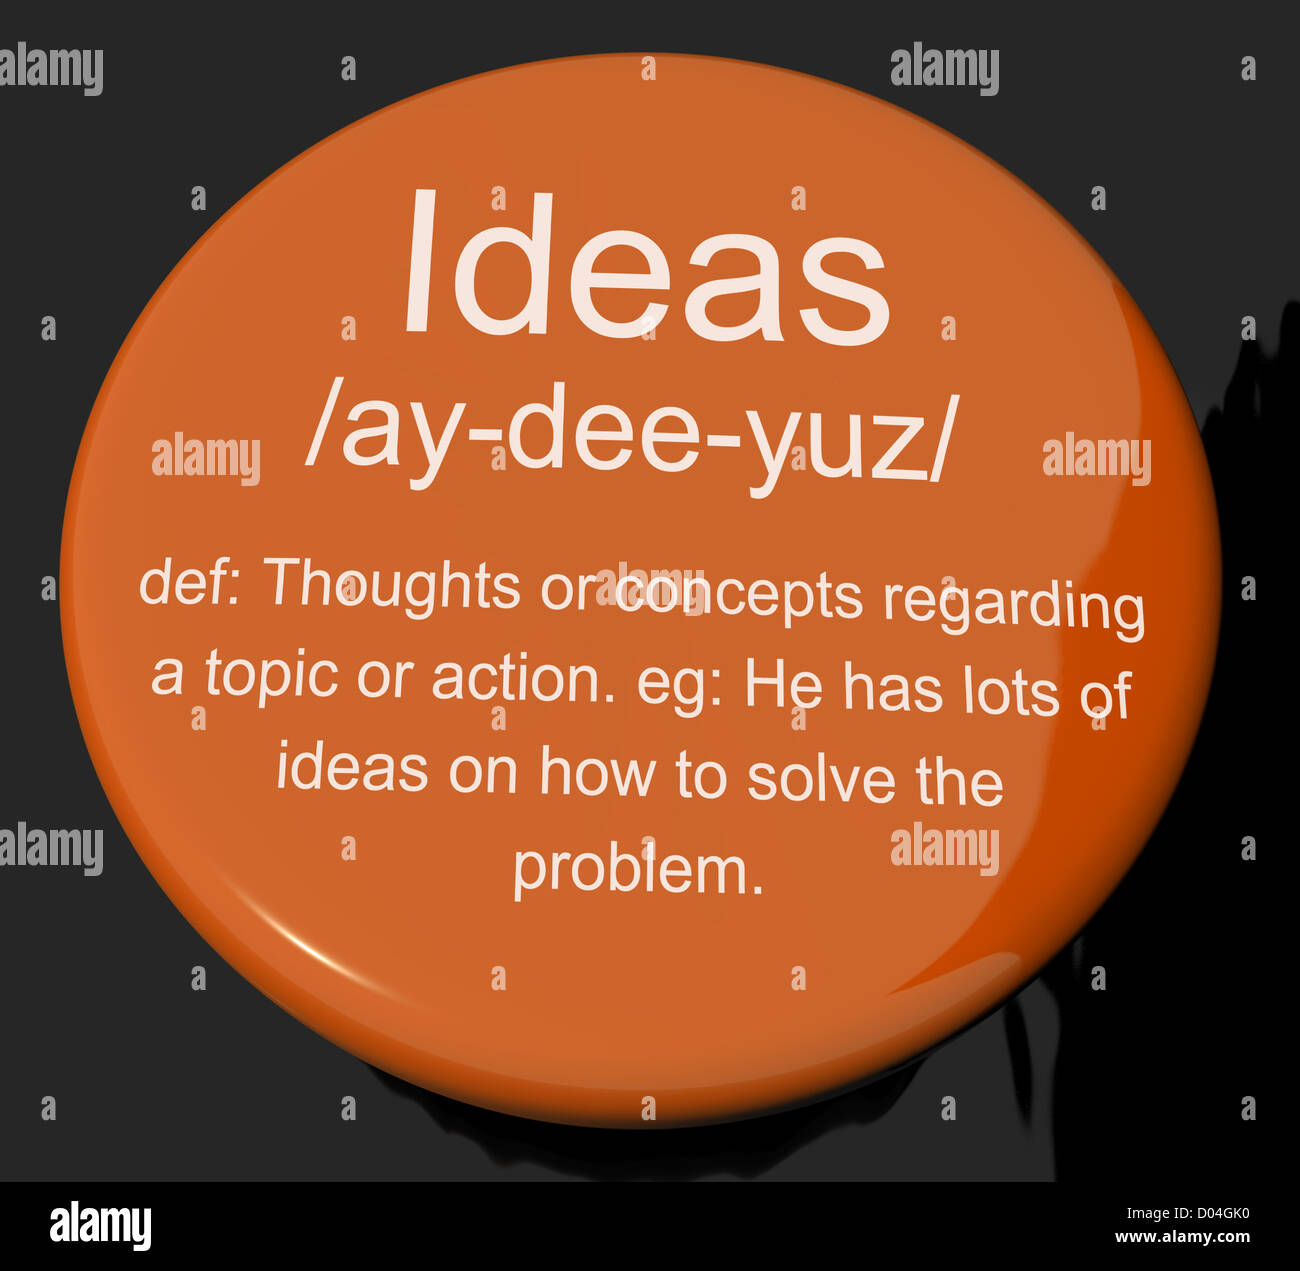 Ideas Definition Button Shows Creative Thoughts Invention And Improvement Stock Photo